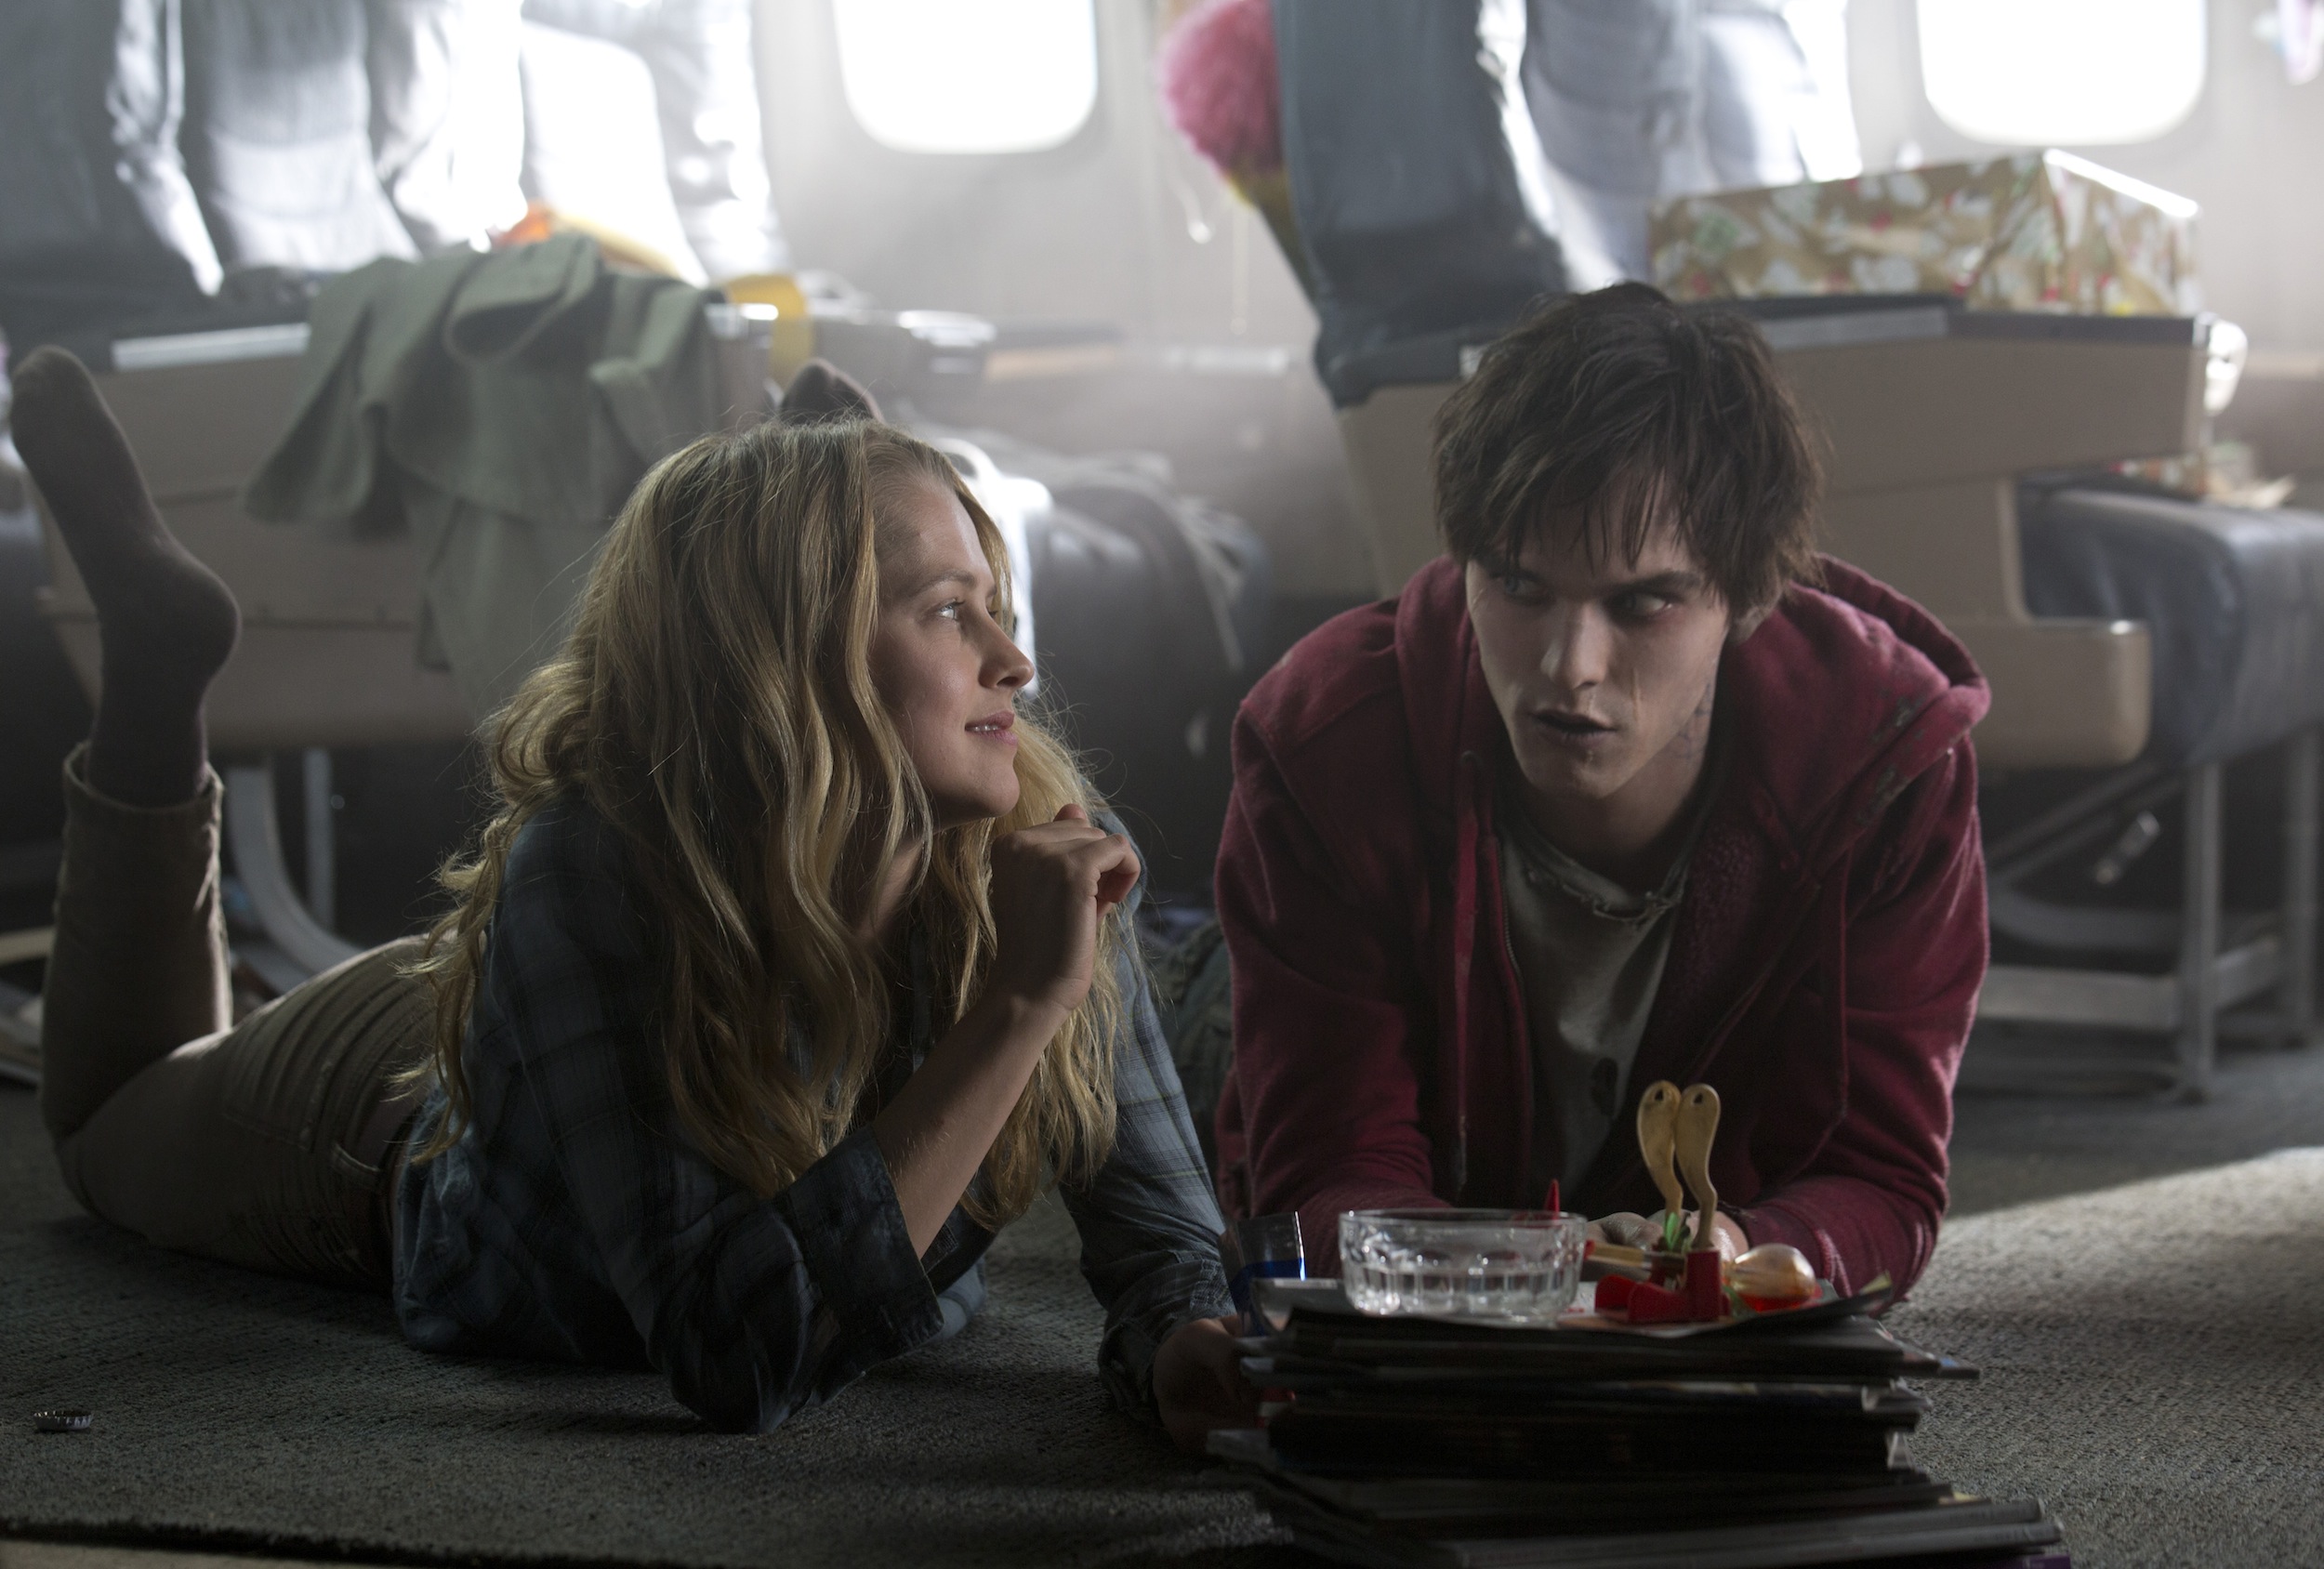 Warm Bodies Backgrounds on Wallpapers Vista